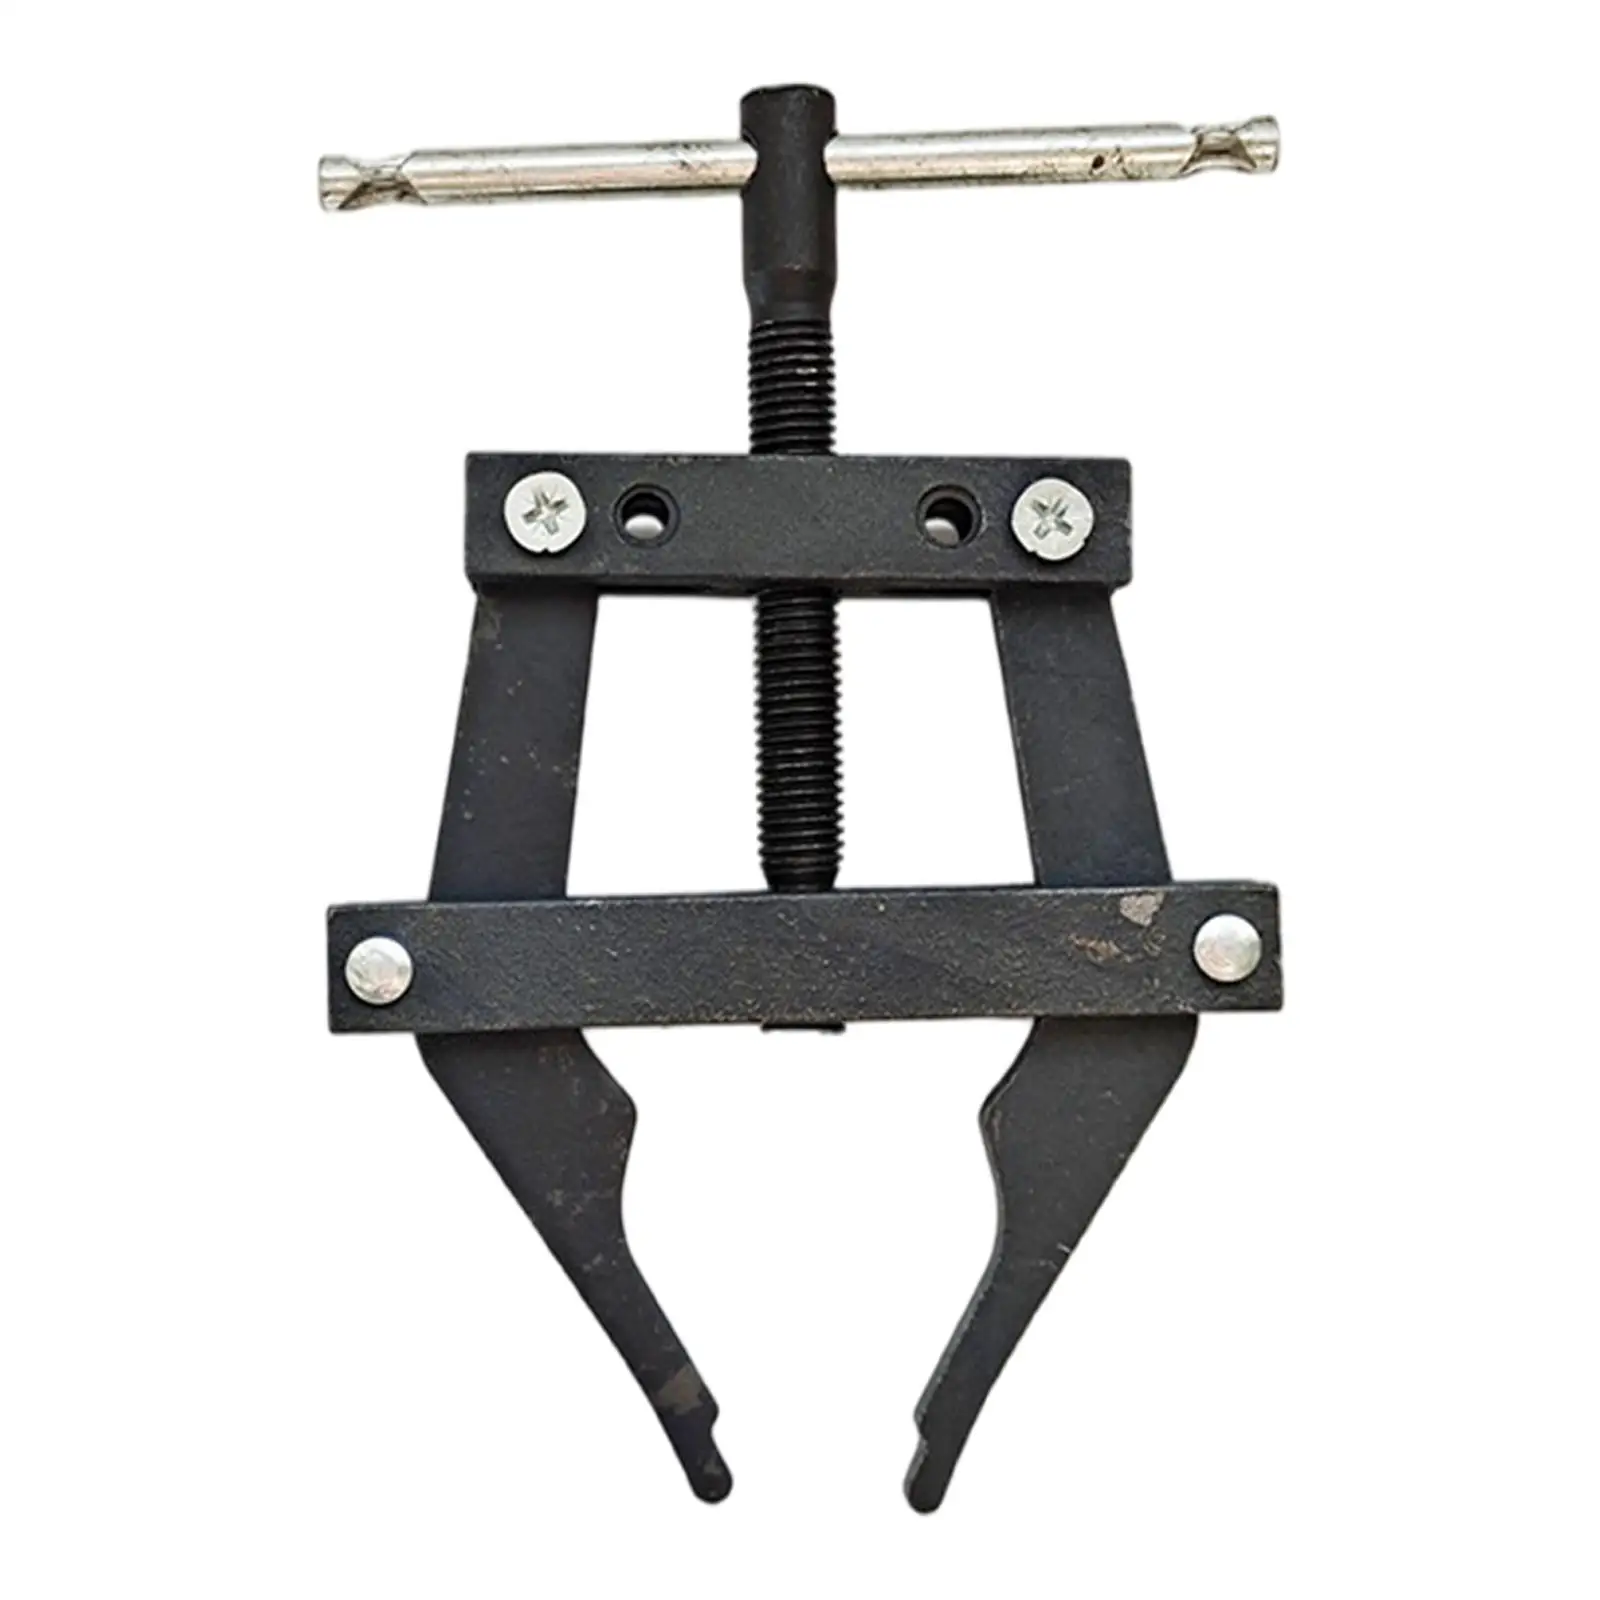 Cast Iron Chain Connecting Tool Accessories Cutter Repair Tool Bicycle  Connecting Puller Puller Holder for Motorcycle Bike